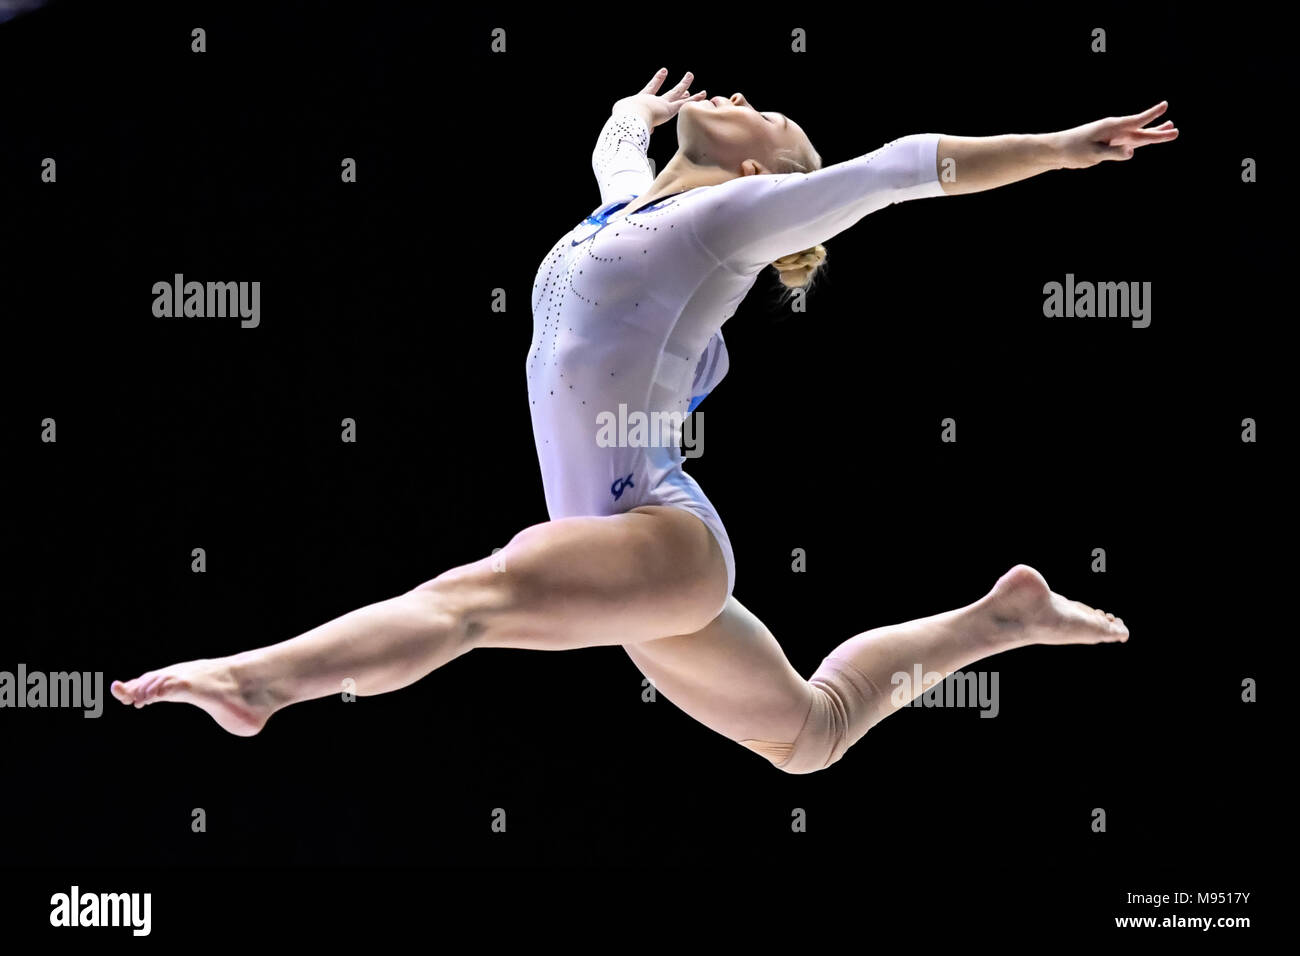 Birmingham, UK. 22nd march, 2018. Nikita Nagornyy (RUS) competes on the Balance Beam during the 2018 FIG Gymnastics World Cup at Arena Birmingham on Thursday, 22 March 2018. Birmingham England. Credit: Taka G Wu Credit: Taka Wu/Alamy Live News Stock Photo